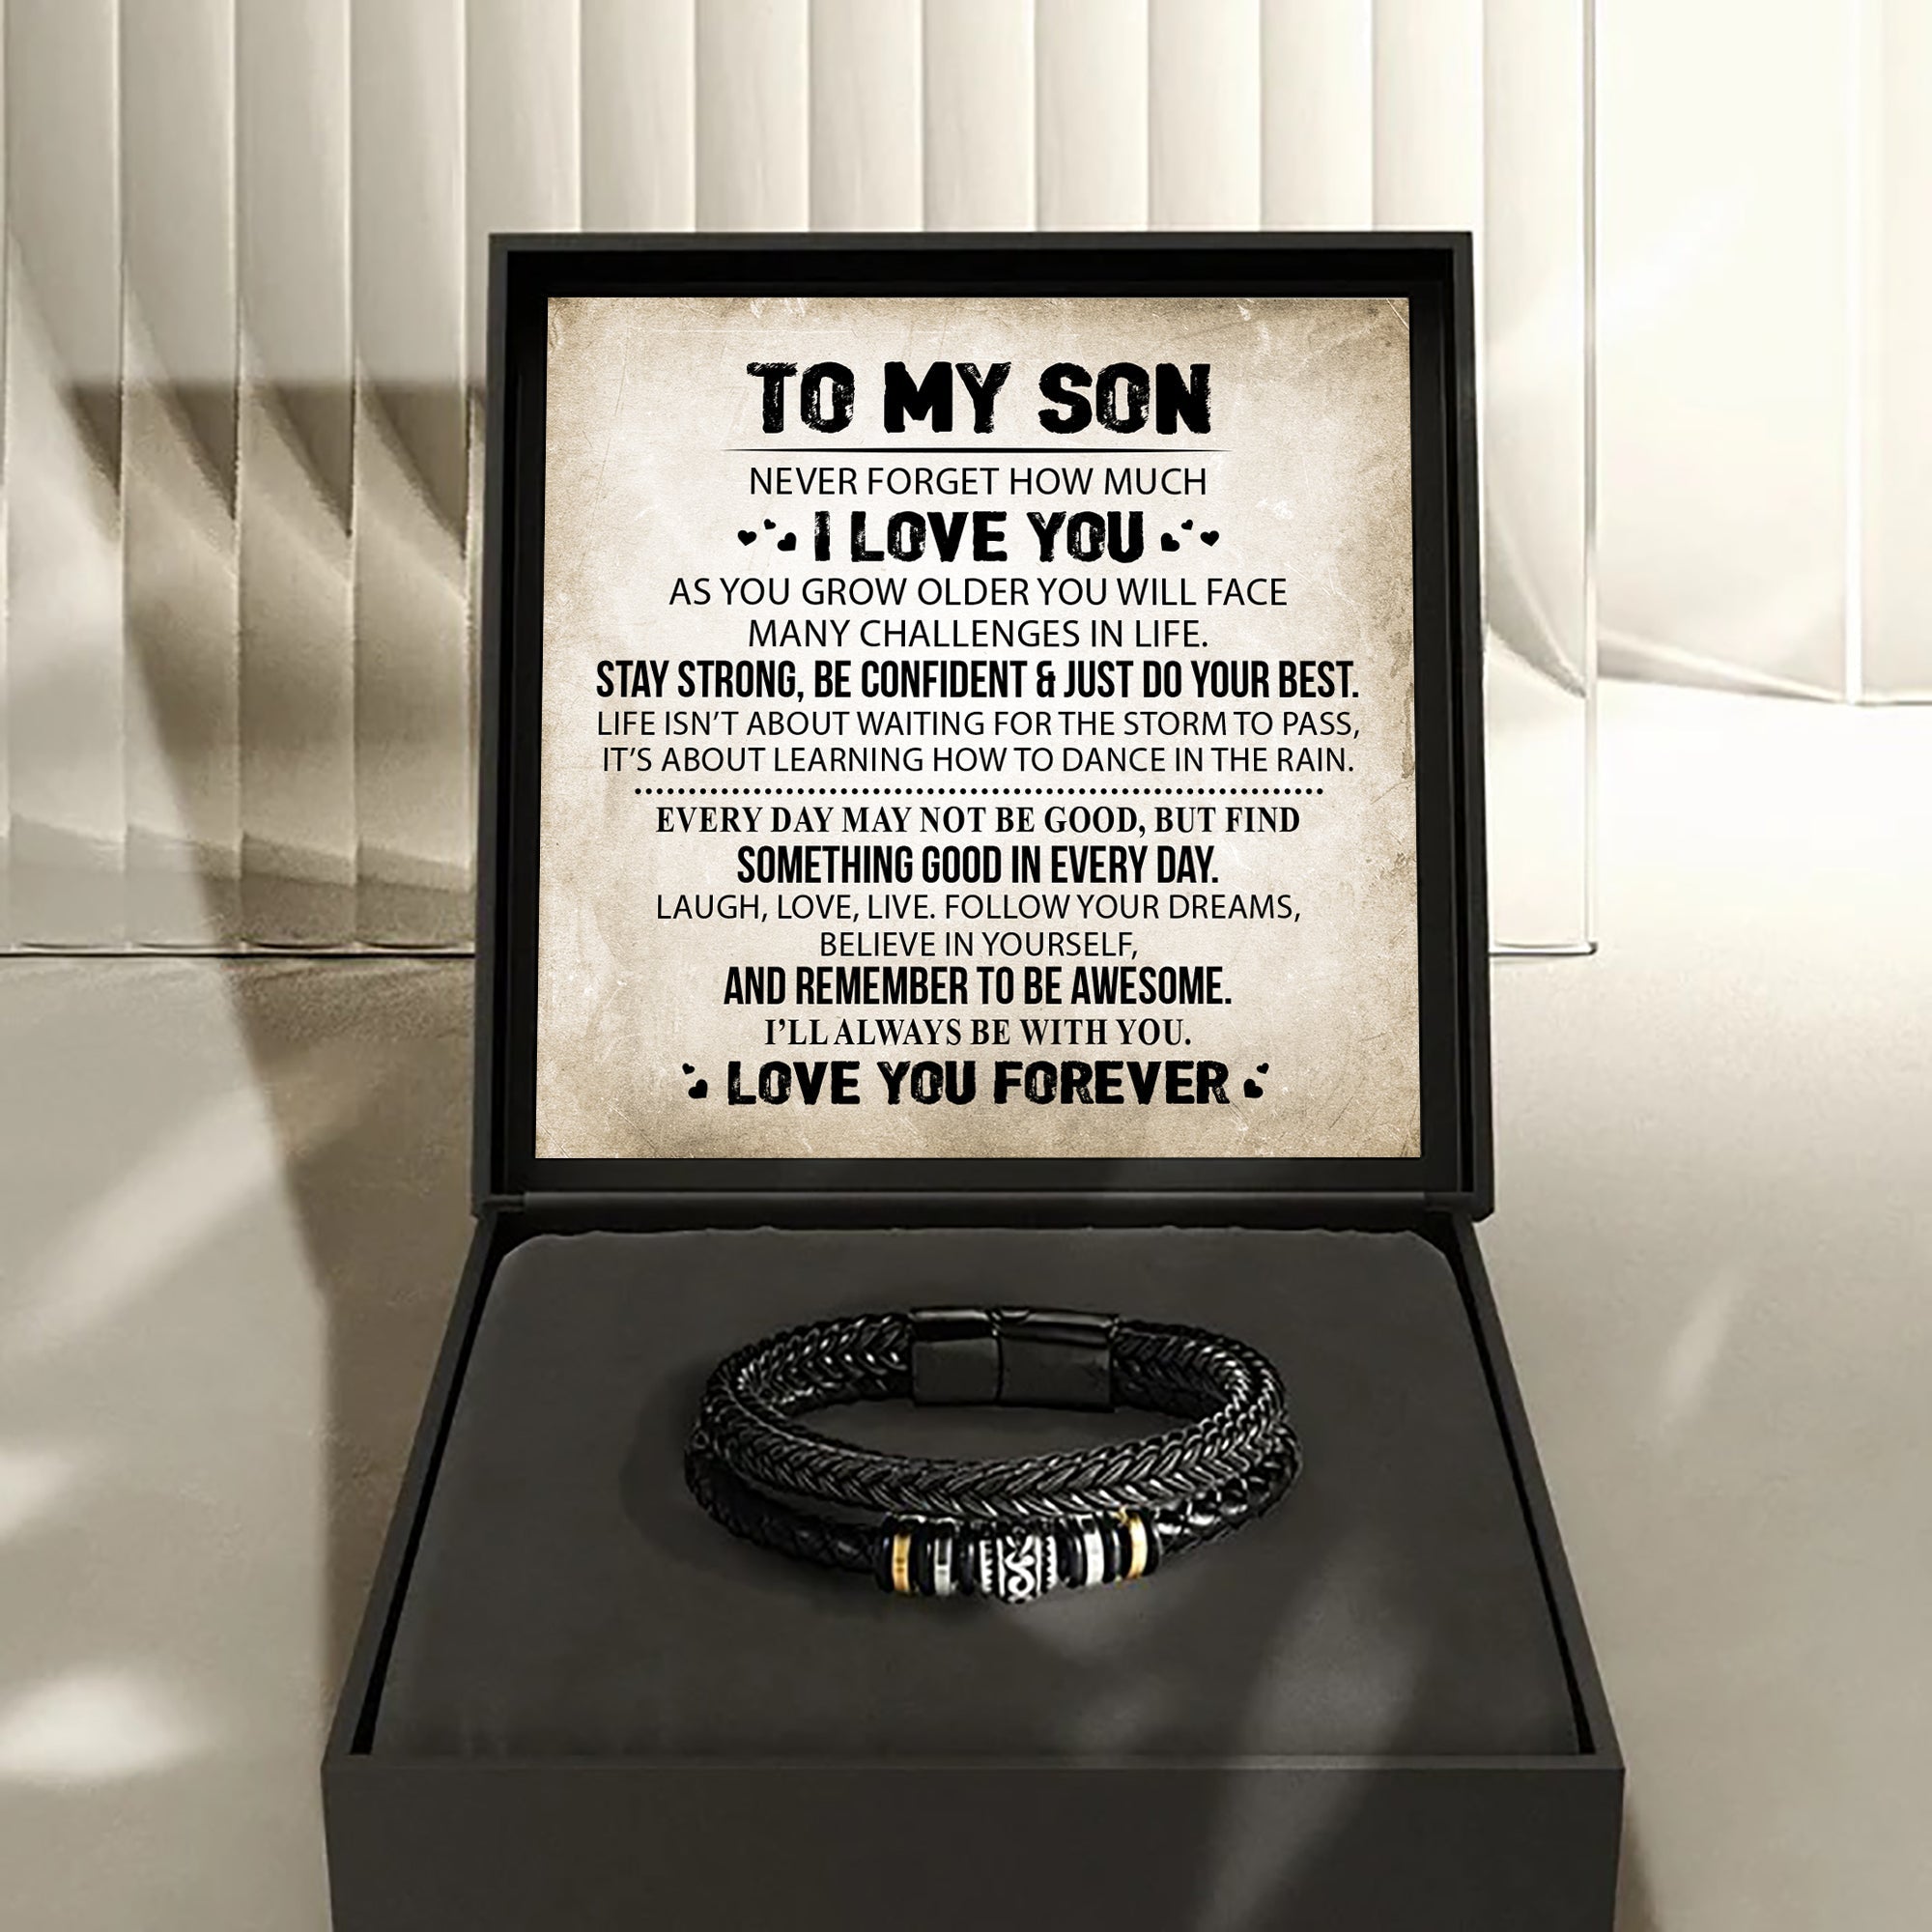 Limited Time Offer - To My Son - "I Love You Forever" Bracelet Gift Set